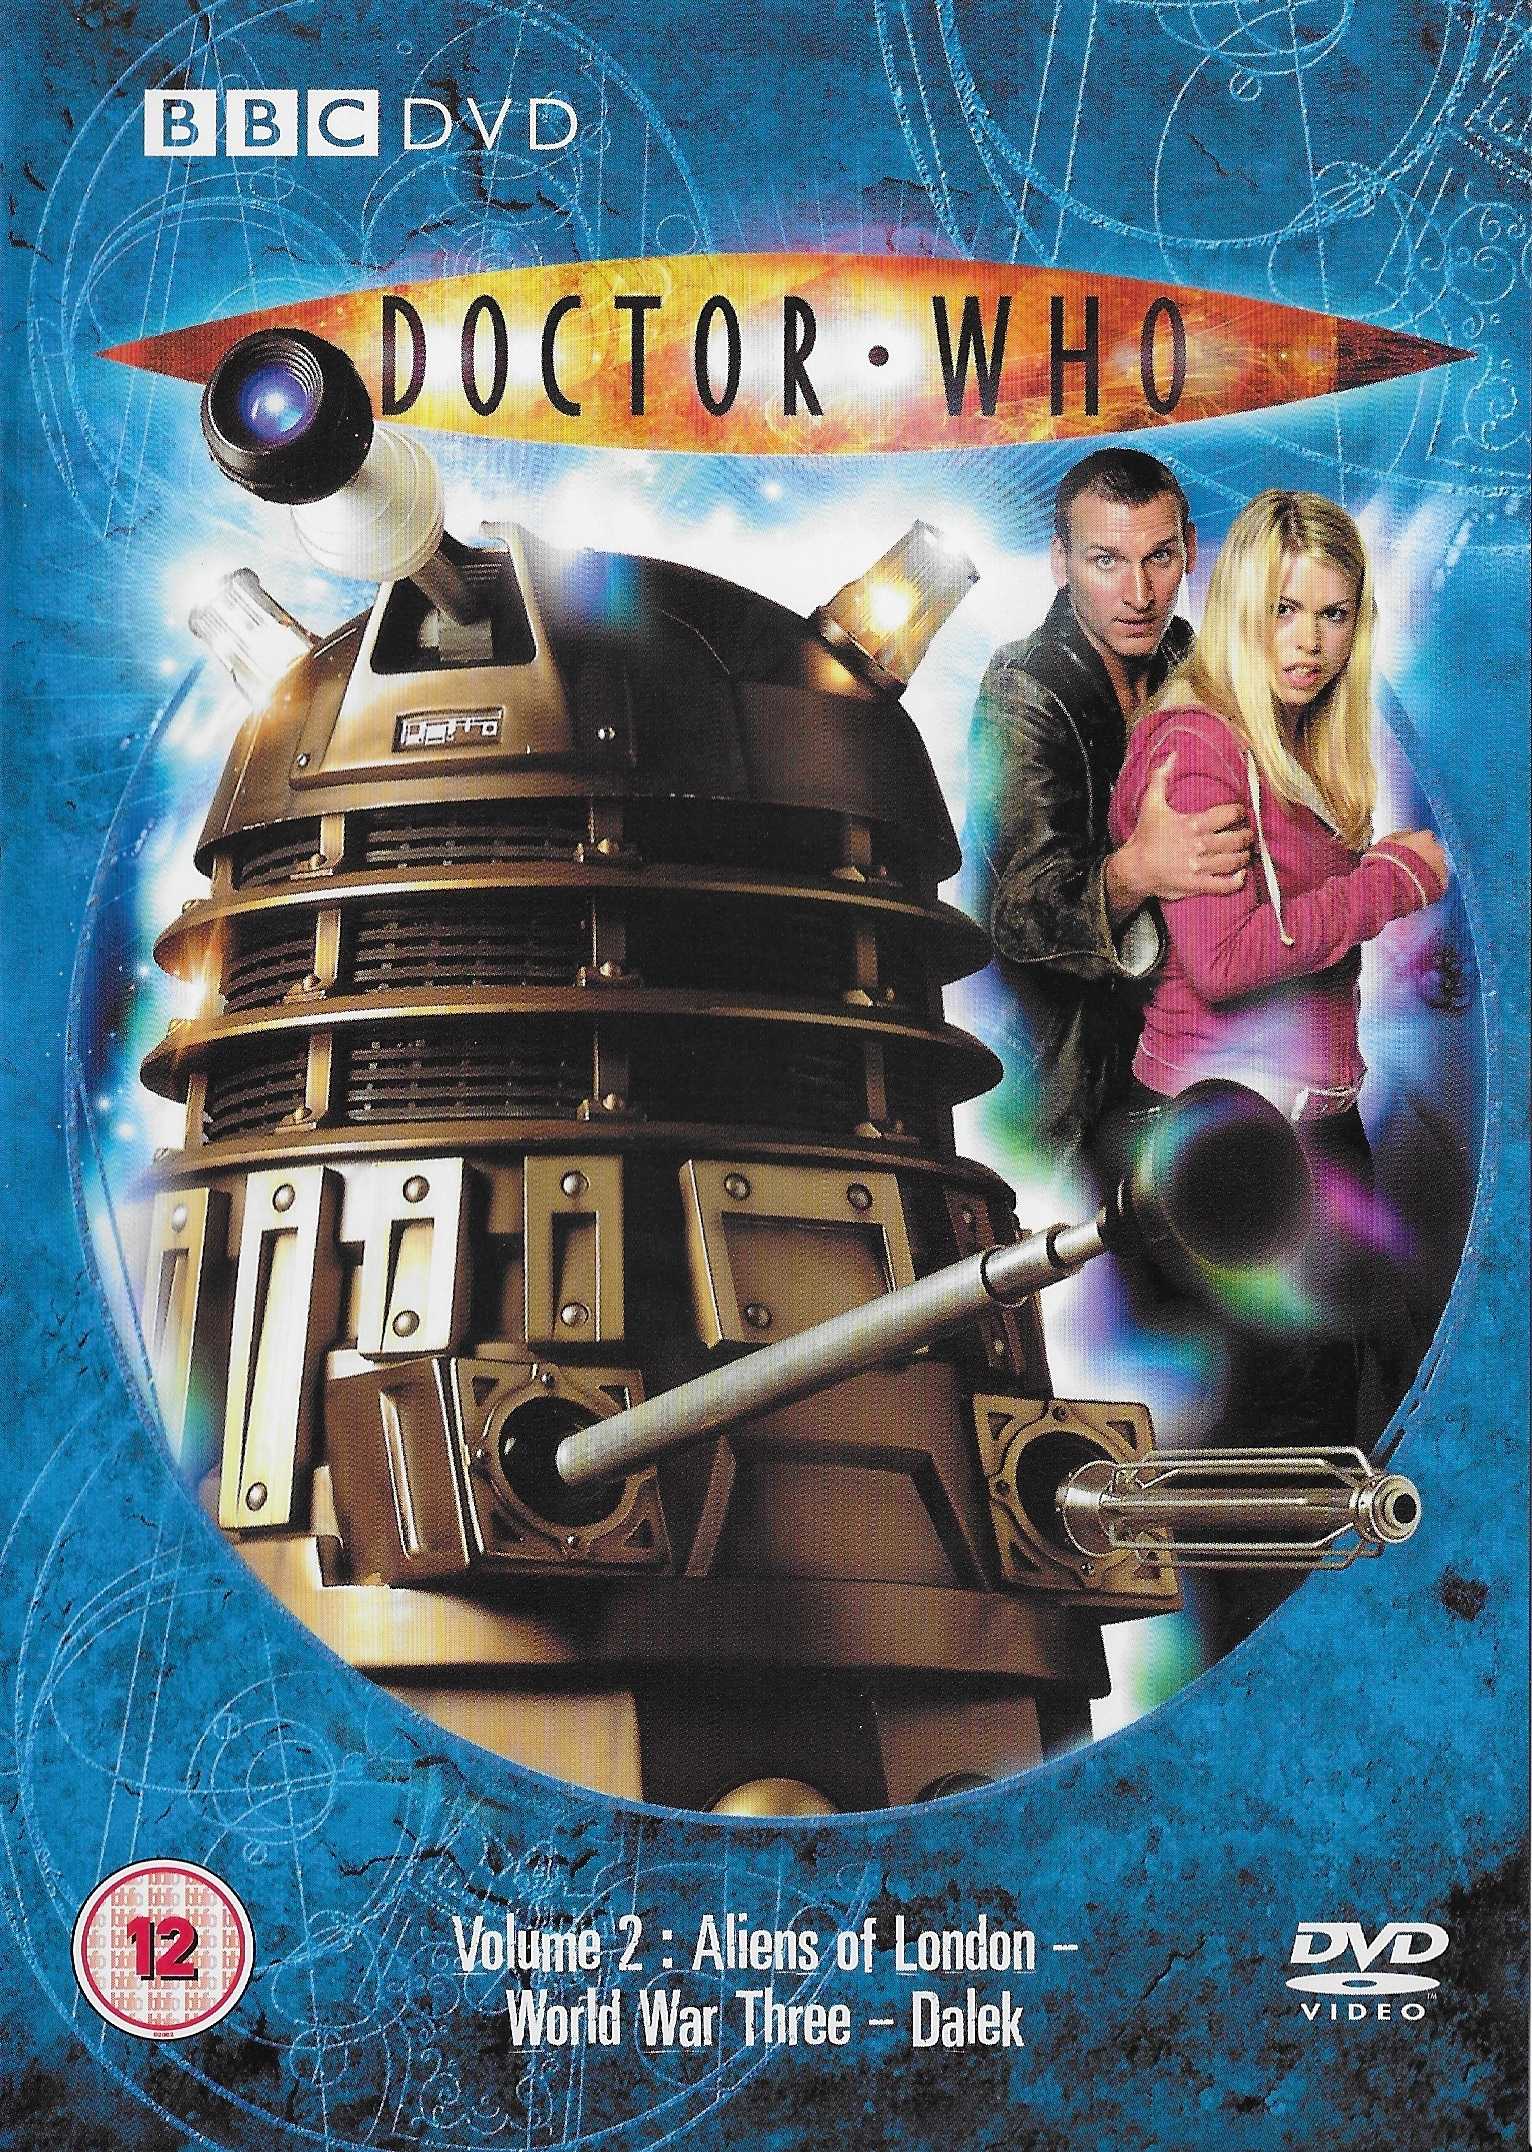 Picture of BBCDVD 1756 Doctor Who - New series, volume 2 by artist Russell T Davies / Robert Shearman from the BBC records and Tapes library